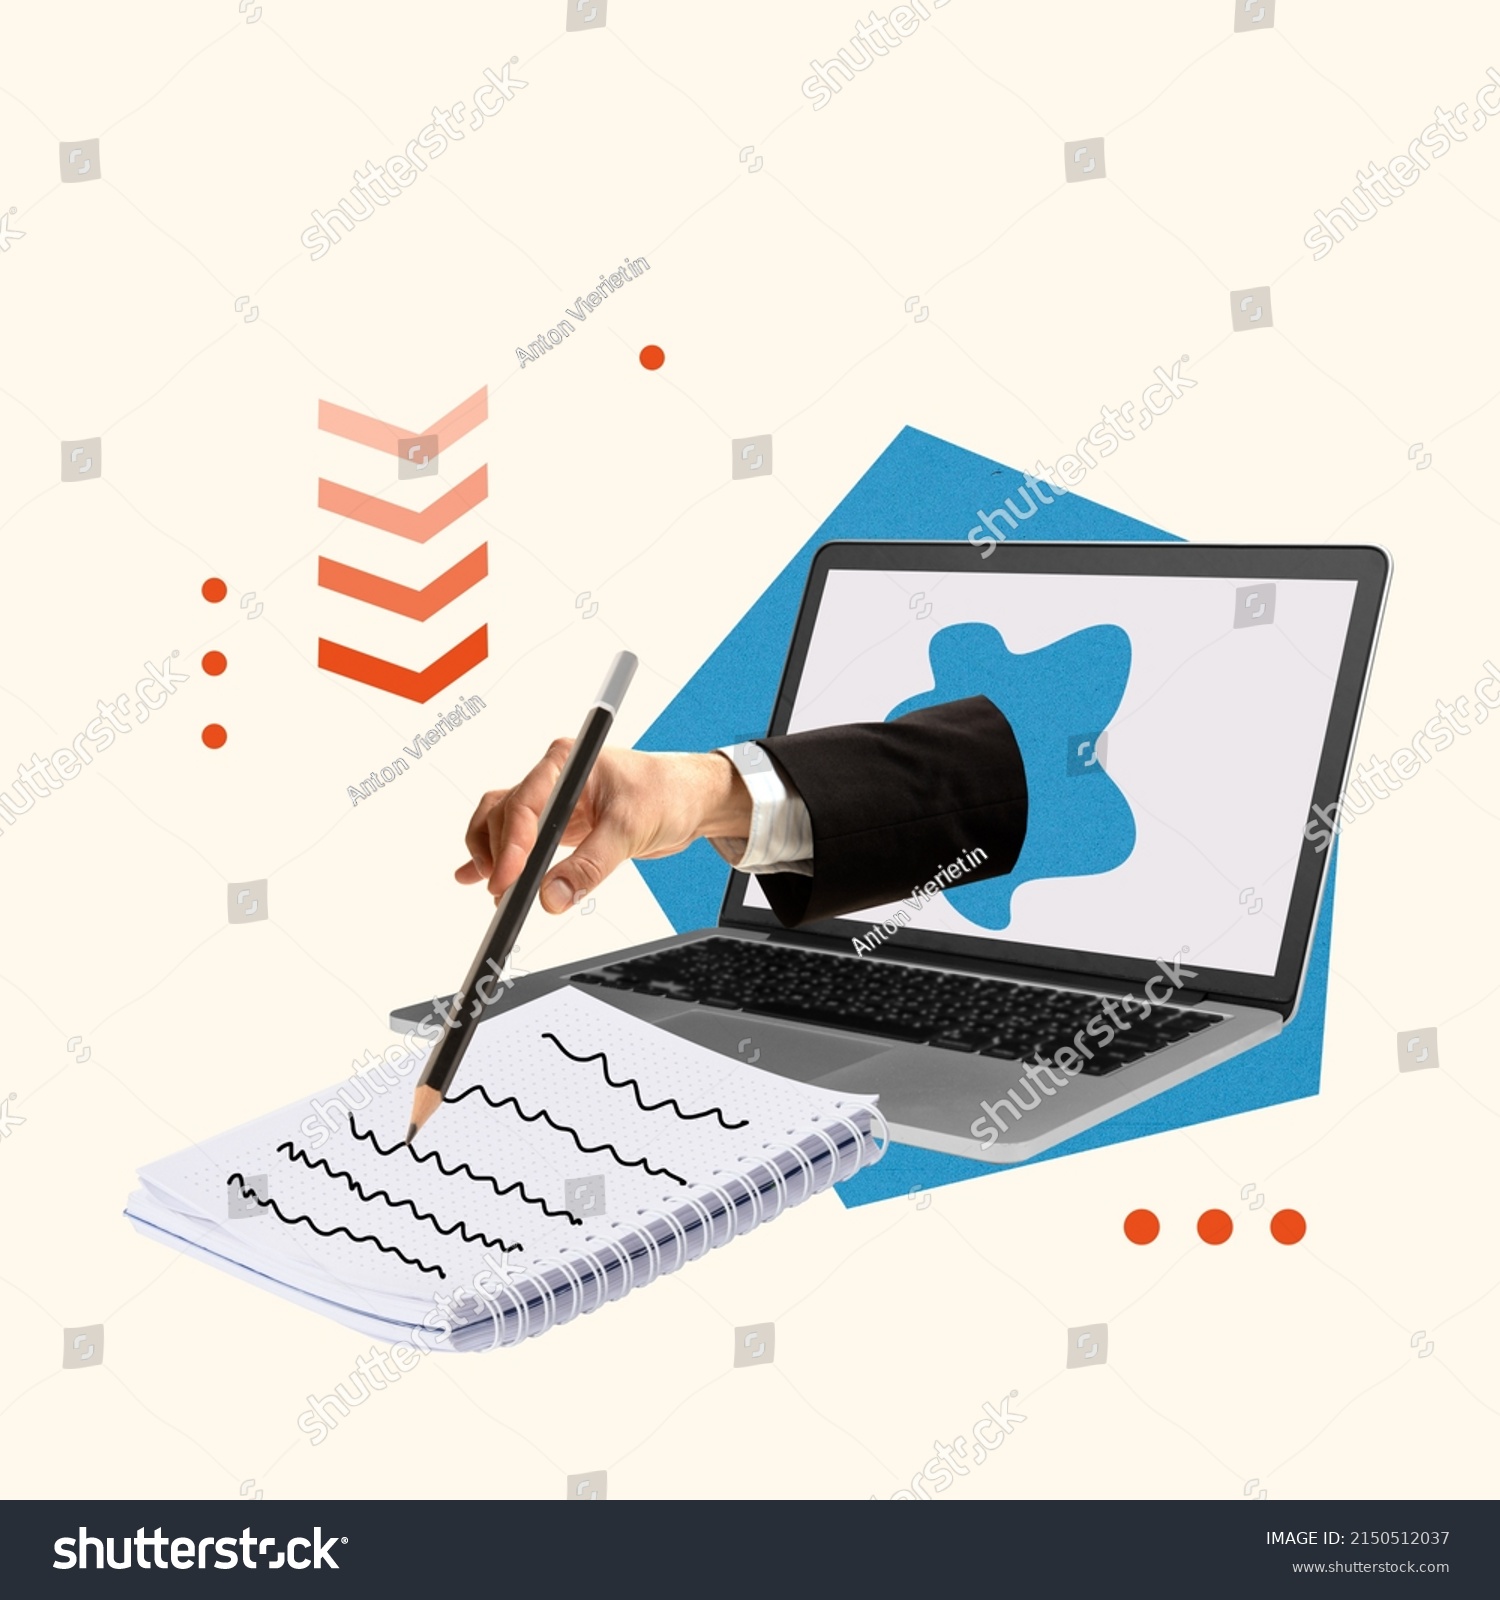 Contemporary art collage. Hand sticking out laptop and writing down business notes. Online negotiations and meetings. Worldwide cooperation. Concept of communication, strategy, success #2150512037